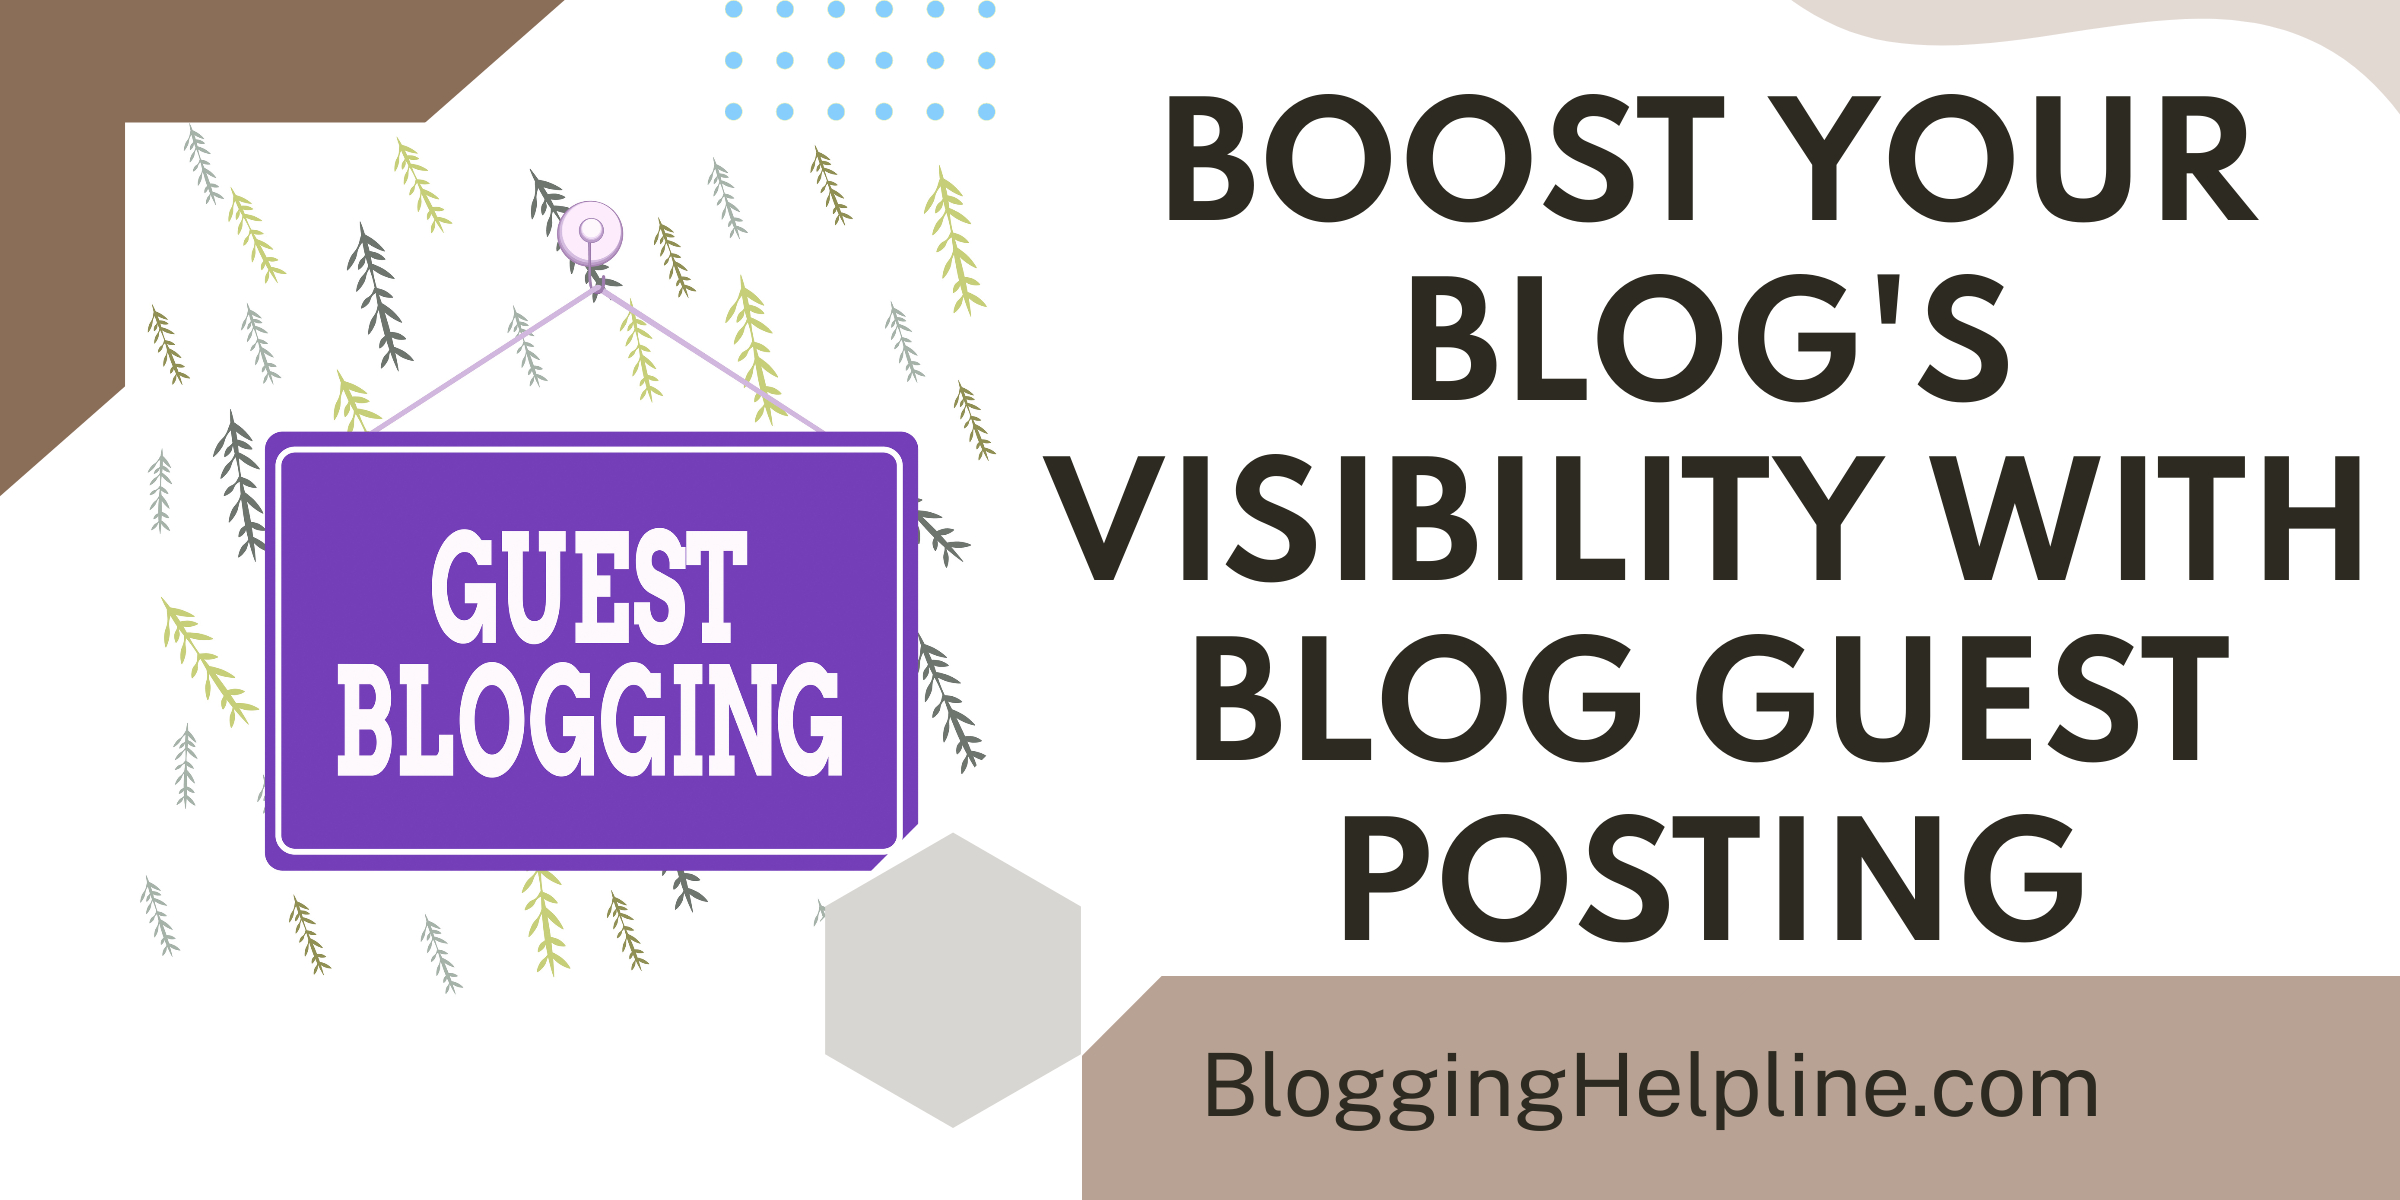 Boost Your Blog's Visibility with Blog Guest Posting